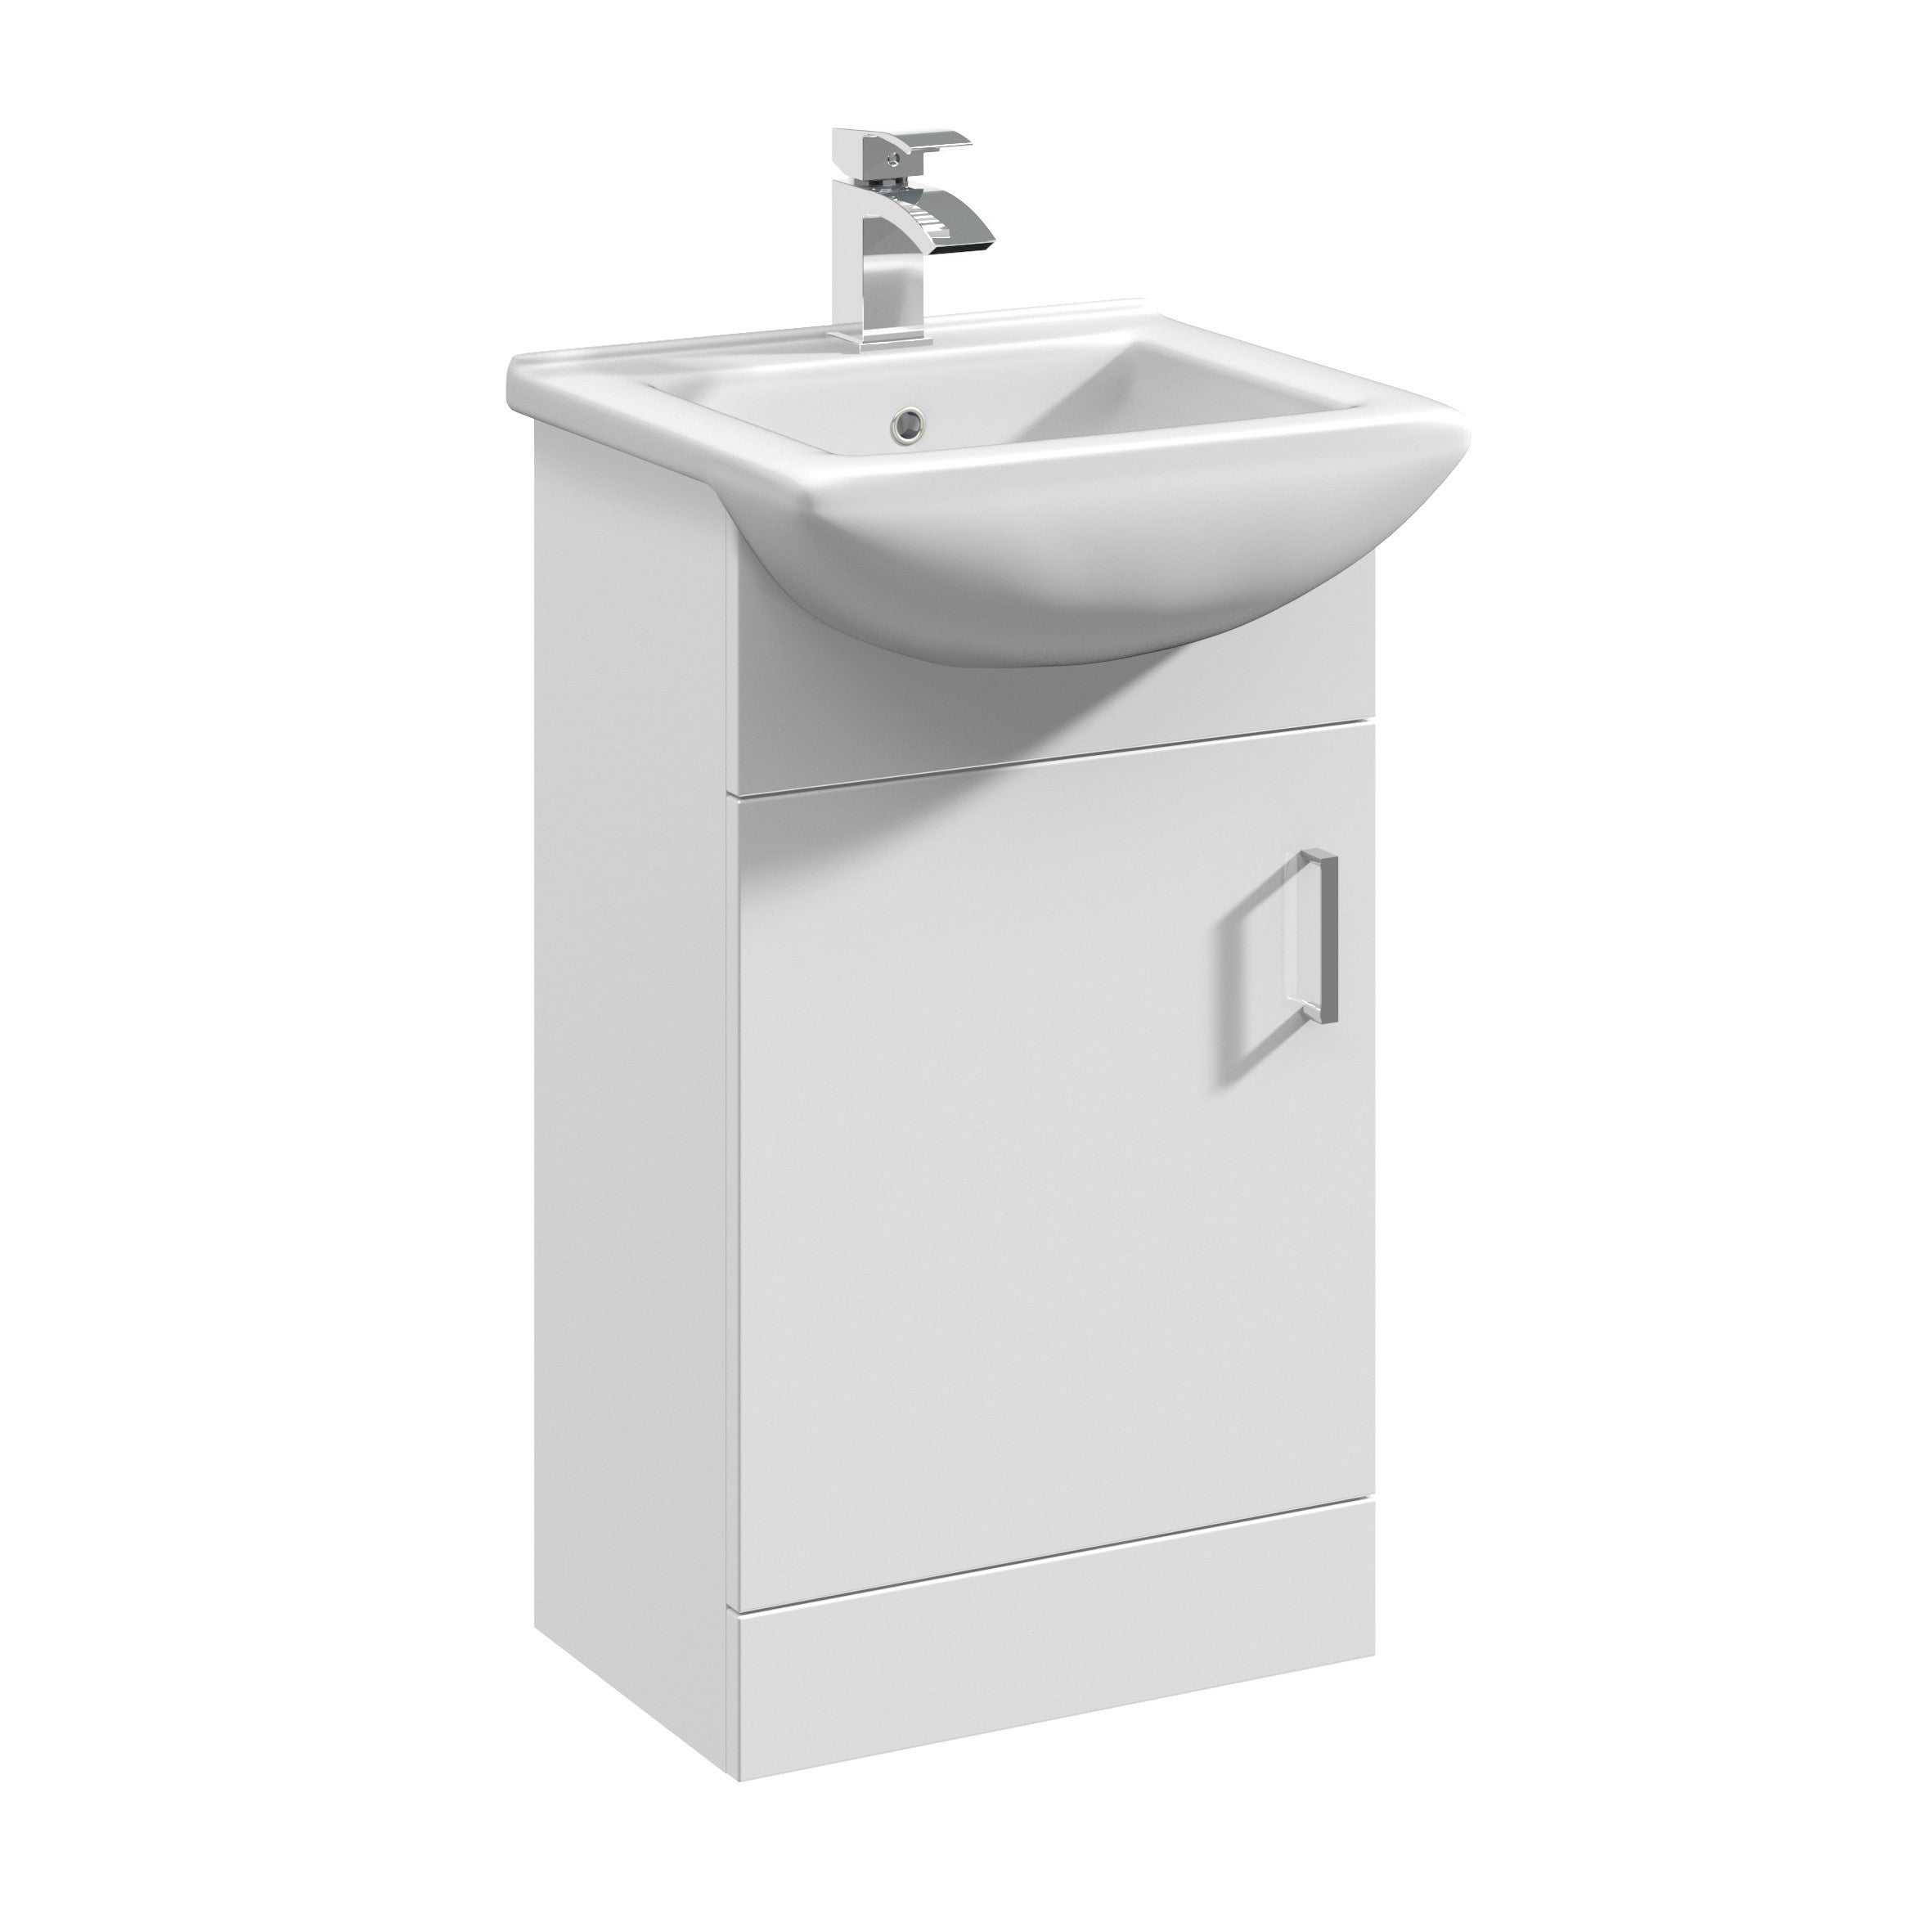 Mayford 1 Door Vanity Unit with Square Basin Gloss White